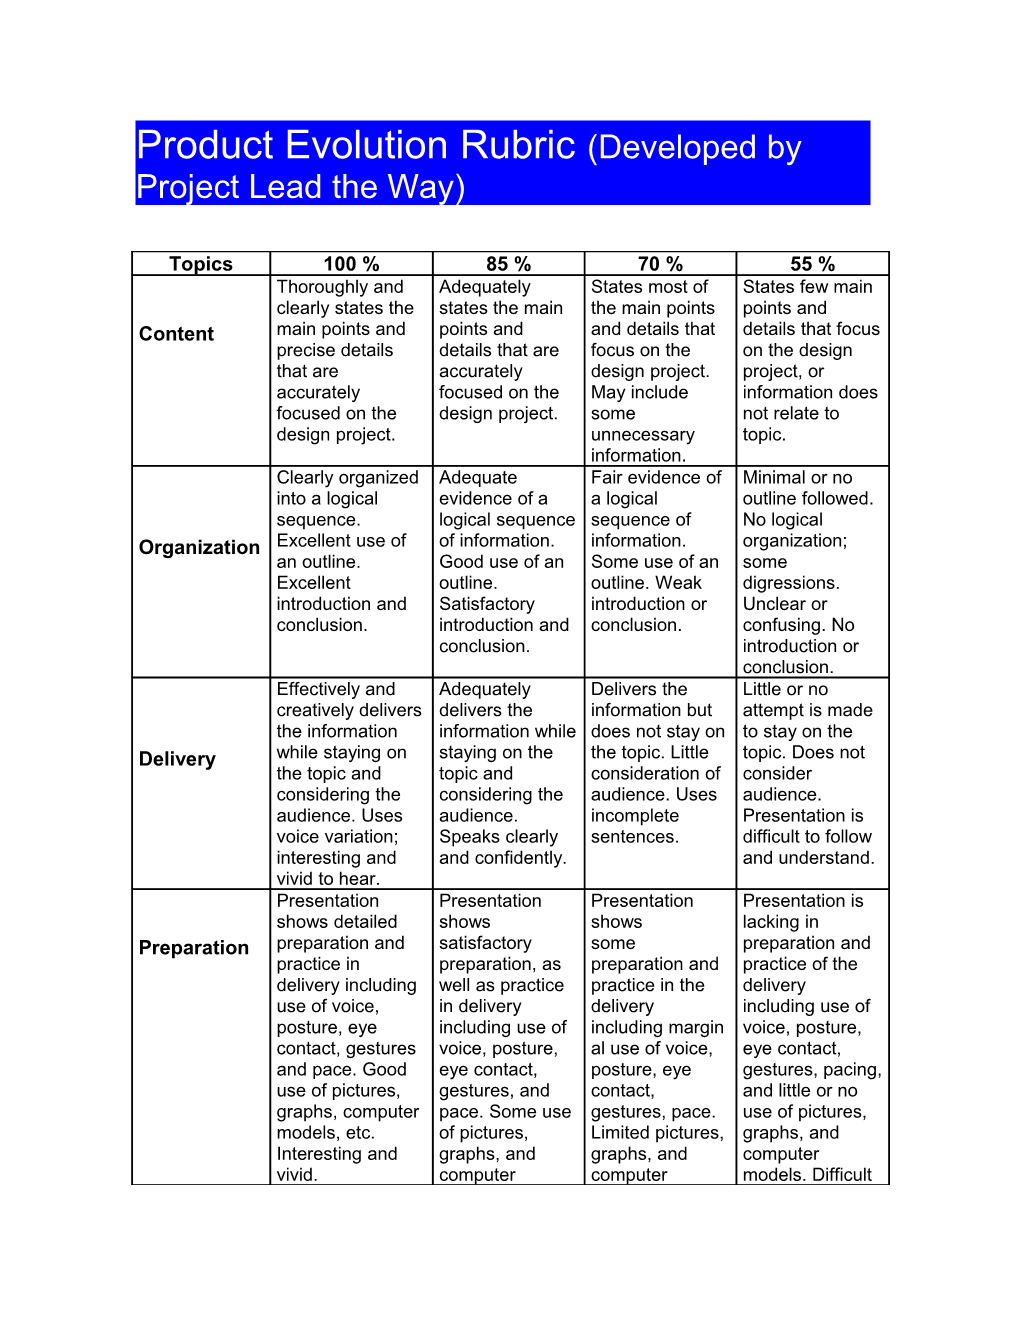 Product Evolution Rubric (Developed by Project Lead the Way)